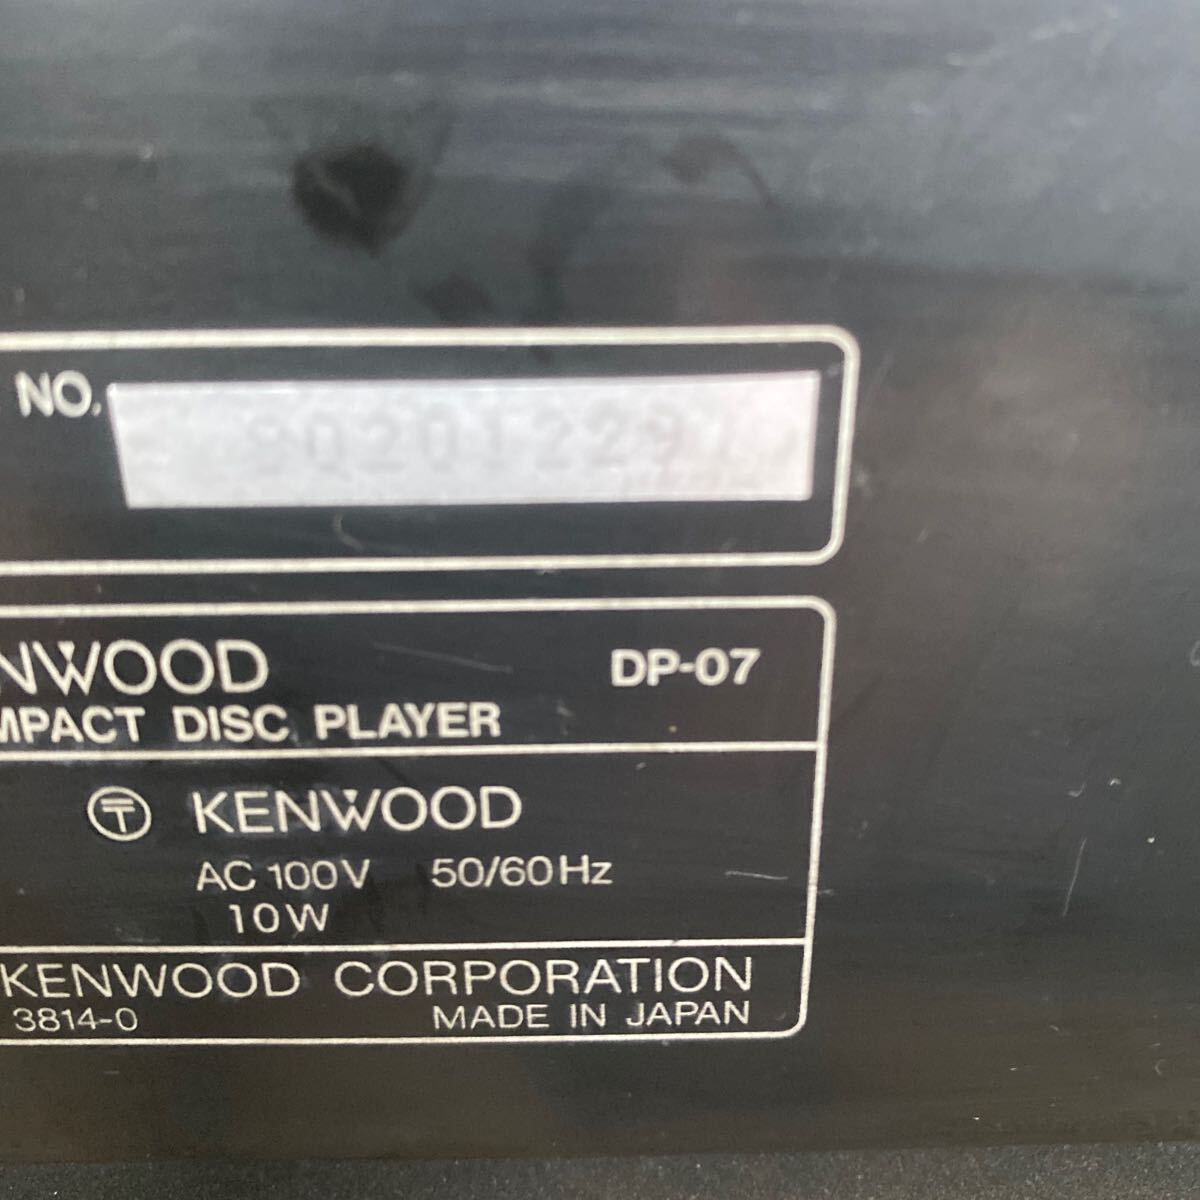 (35)KENWOOD audio equipment system player DP-07 /KX-07 /KT-07 /DC-07 /DA-07/GE-07/LS-05 Kenwood present condition goods 2 point . shipping 